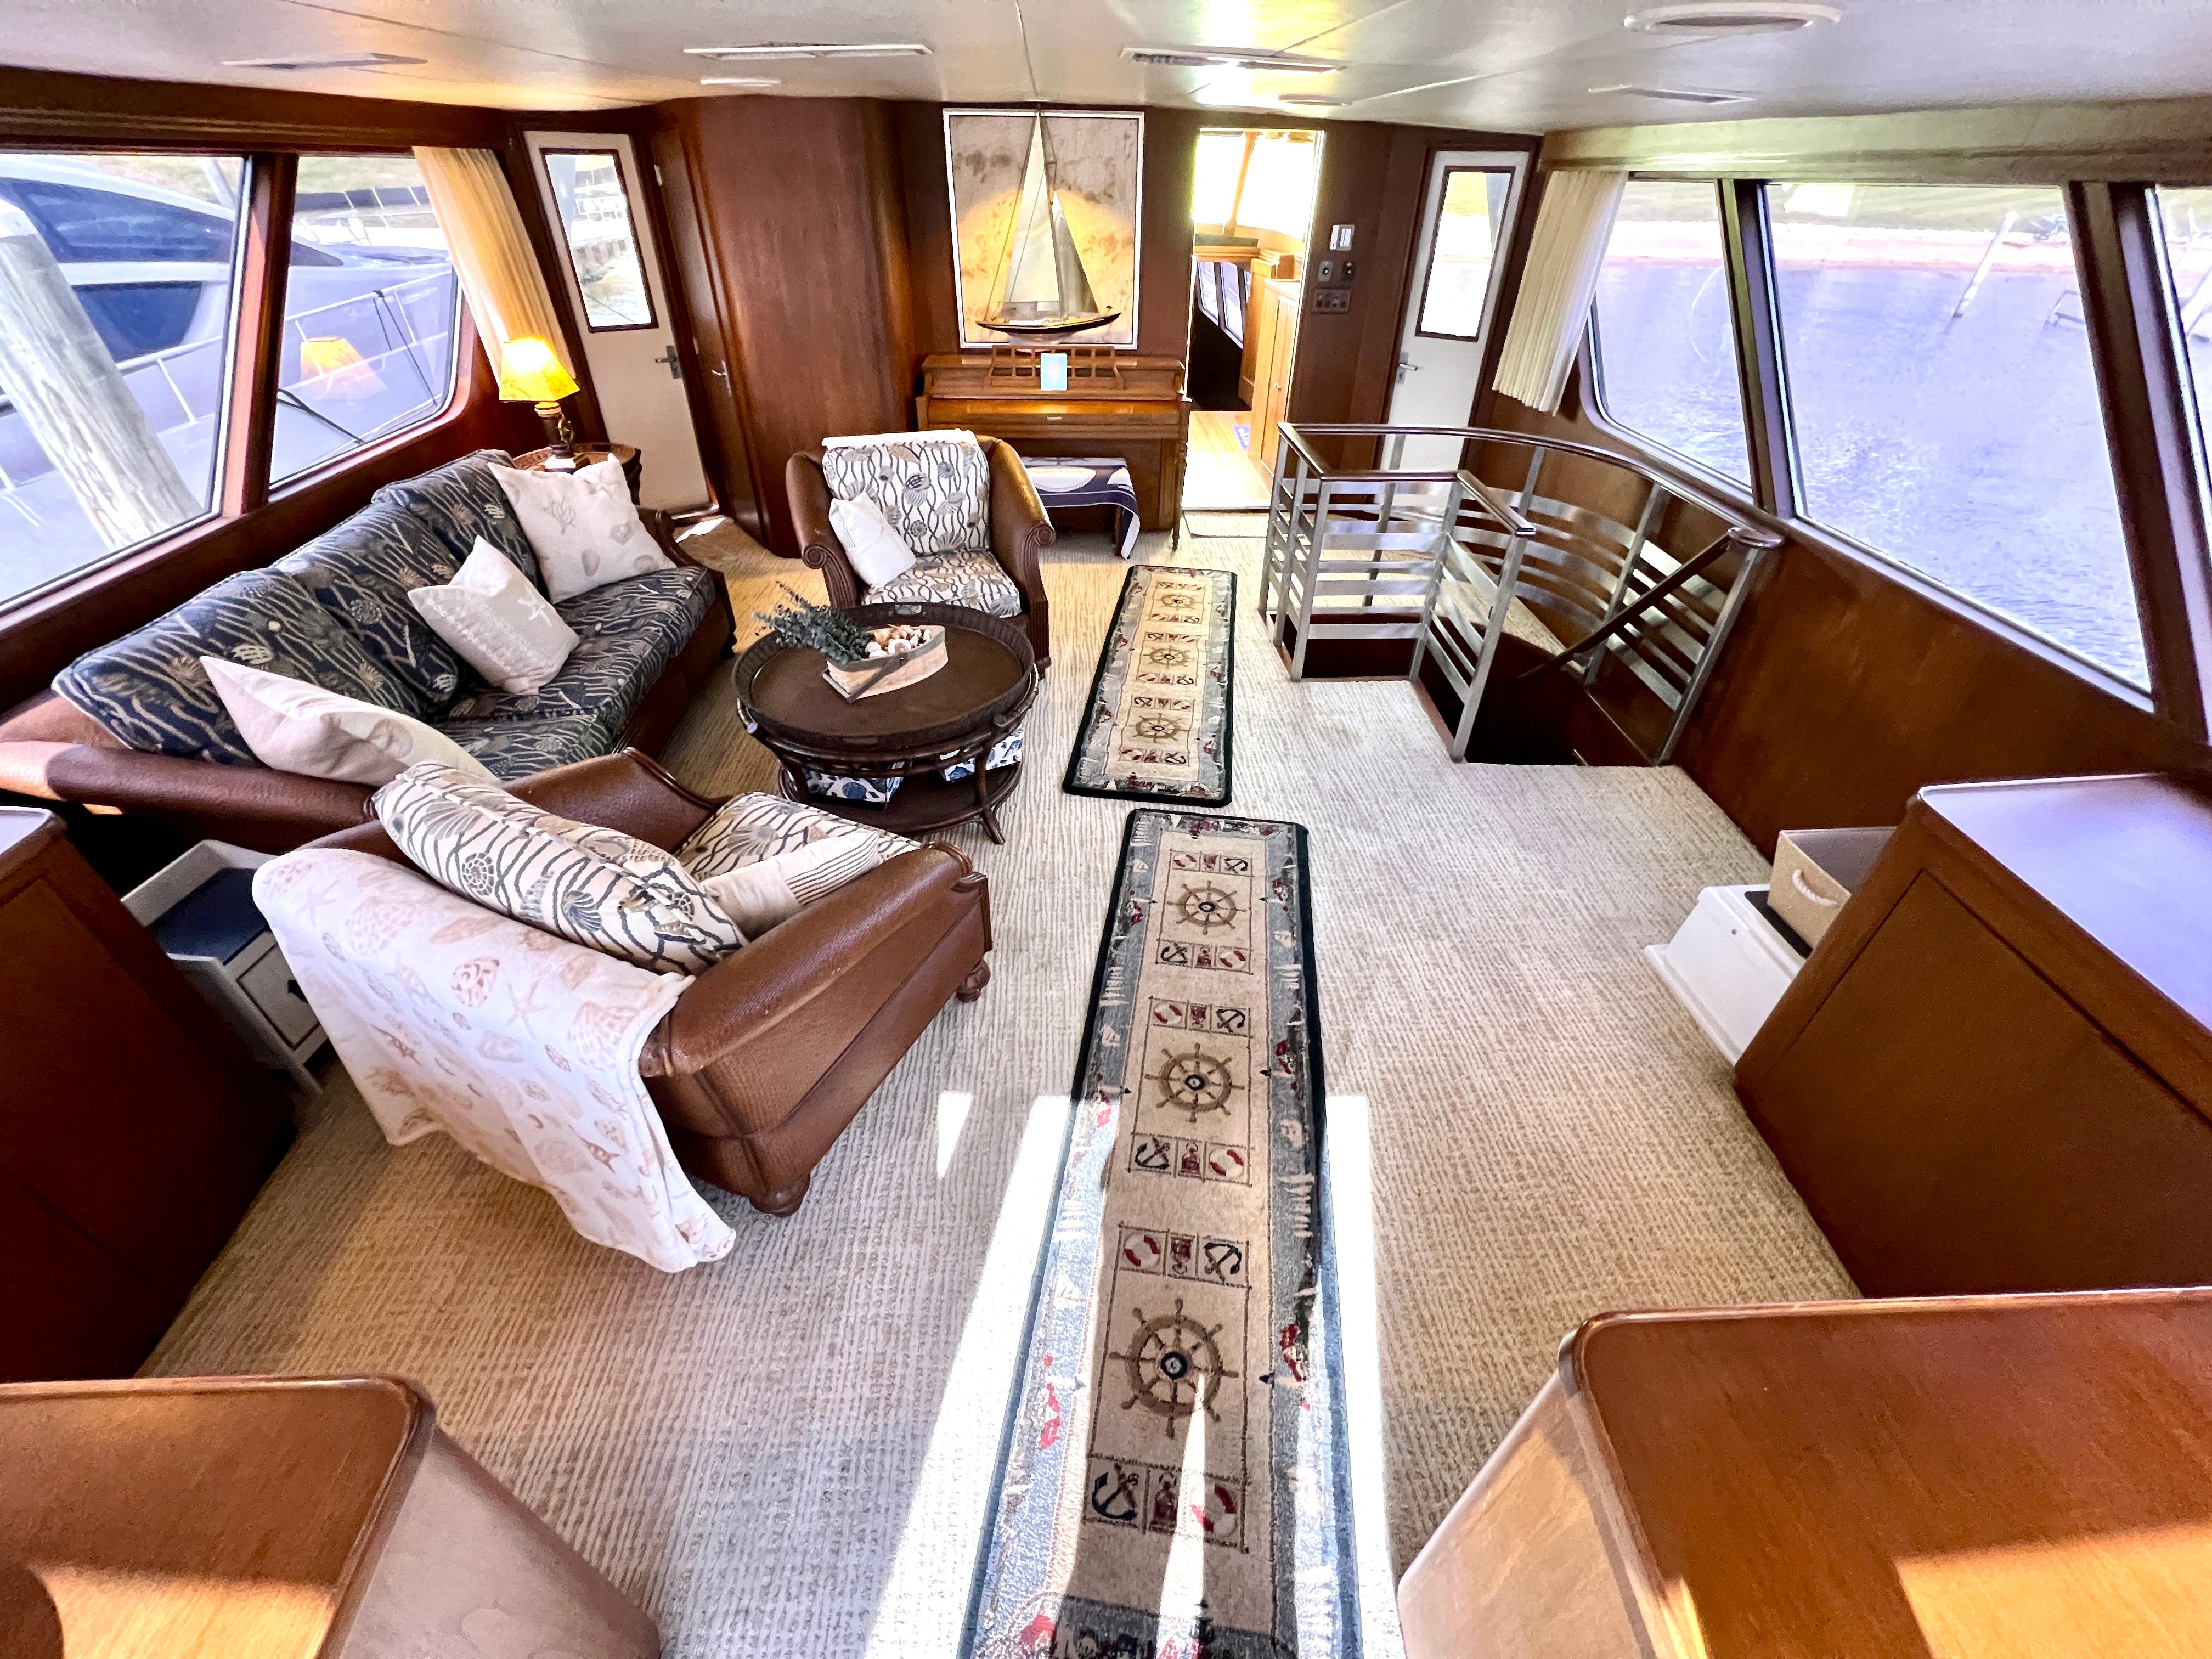 YACHTS A LUCK Motor Yachts Burger for sale - YachtWorld